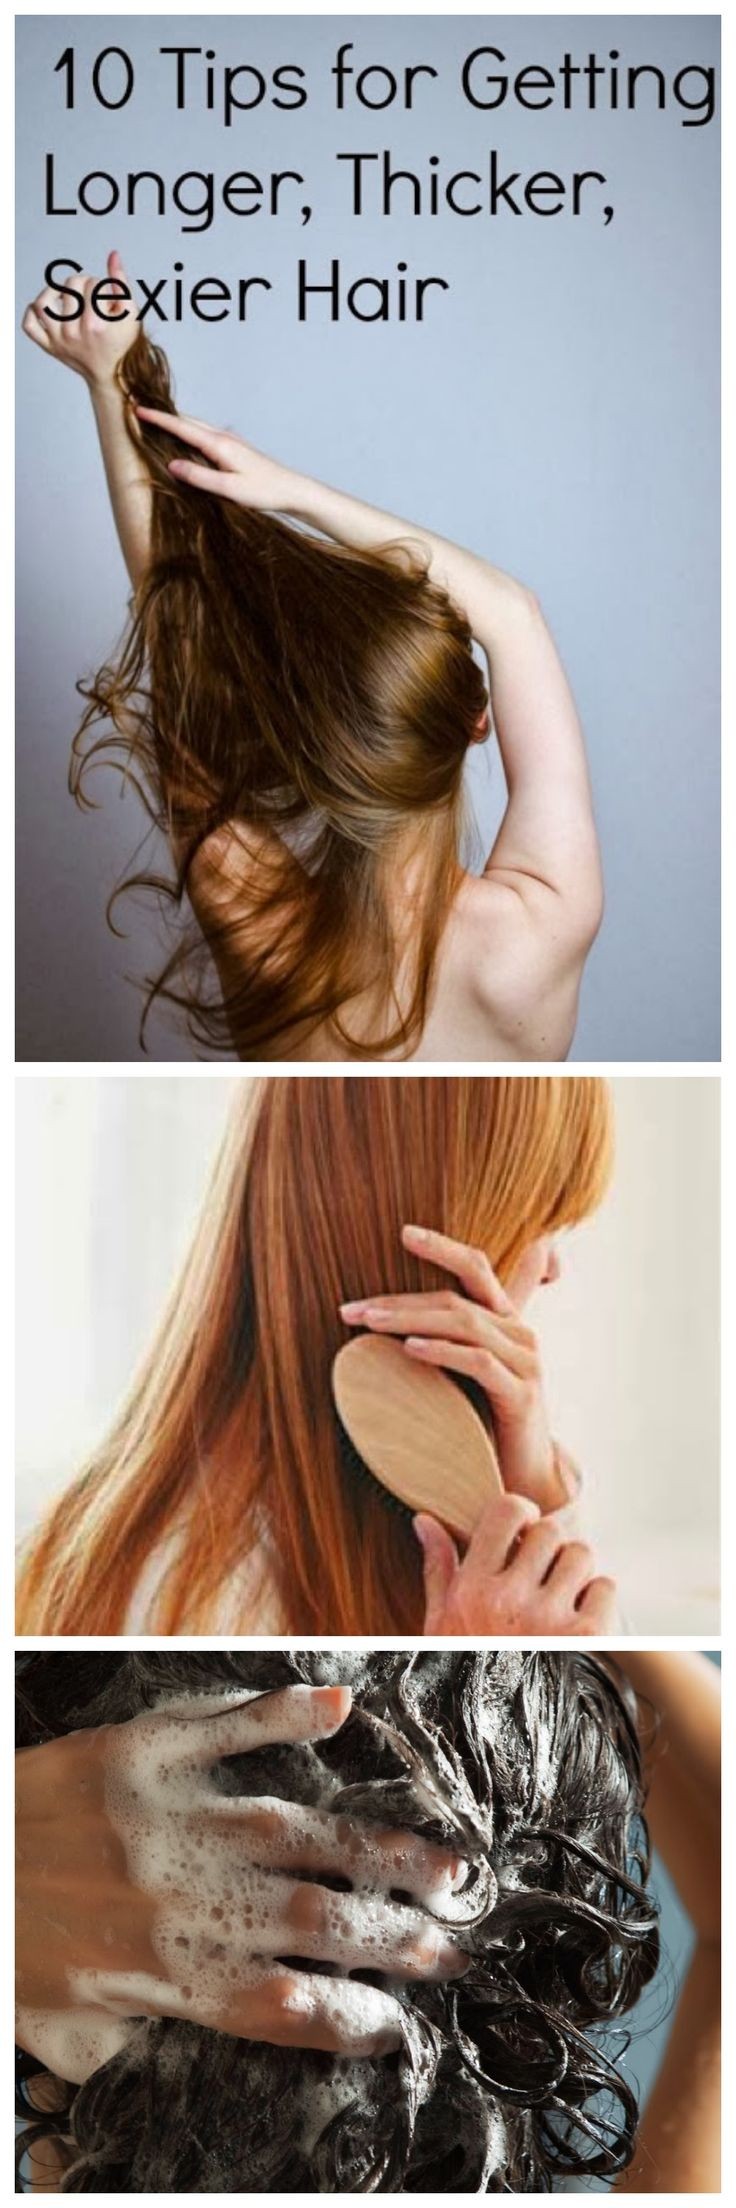 10 Tips for Getting Longer,Thicker, Sexier Hair .....